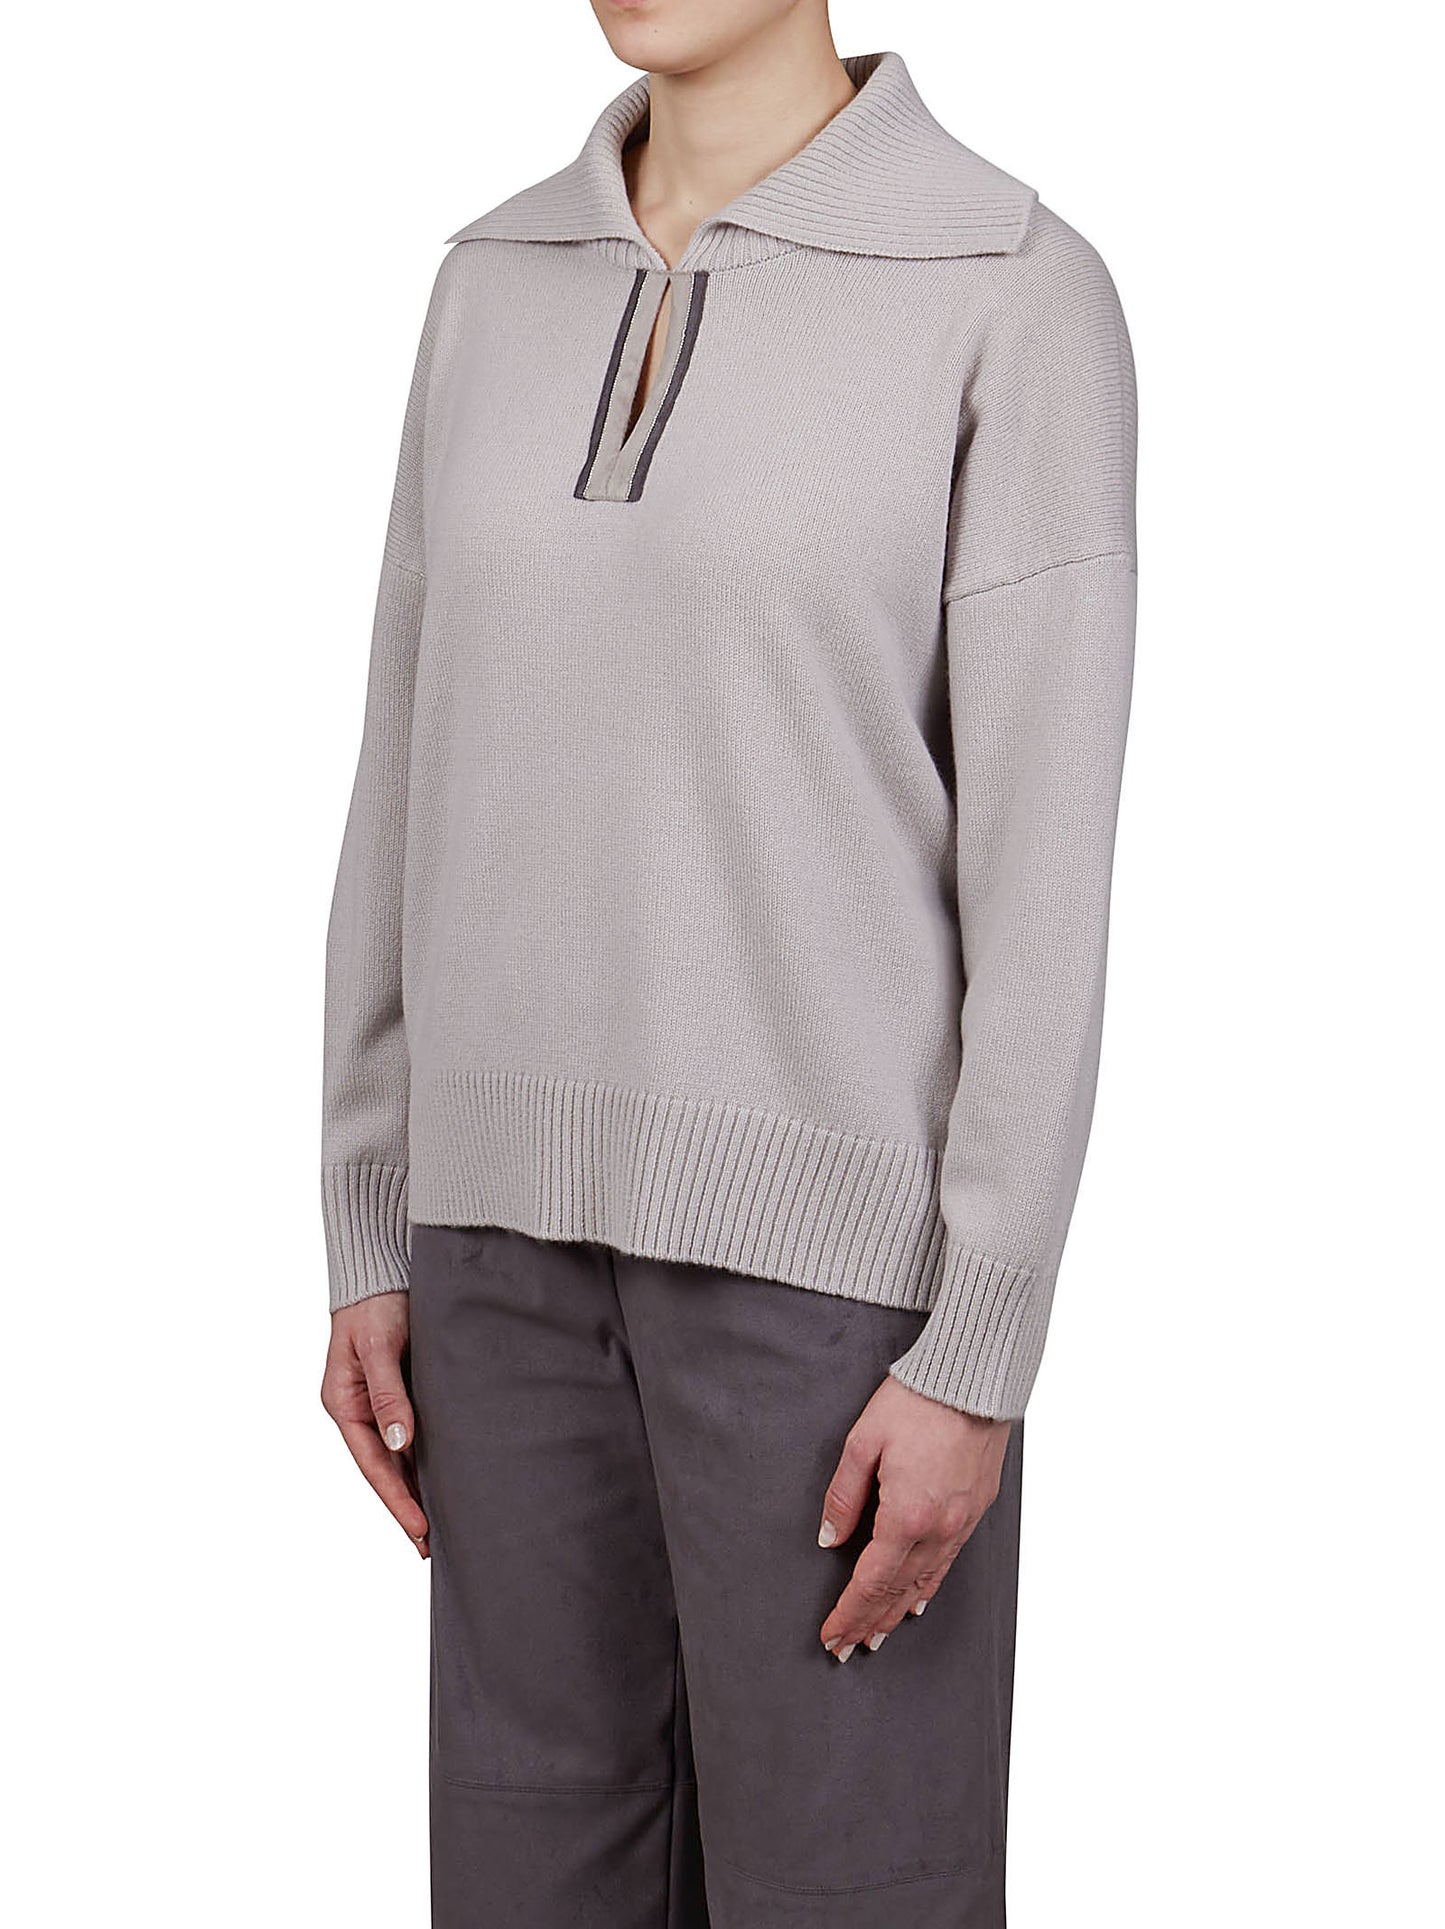 The V-Neck Collar Detailed Knitted Sweatshirt by Purotatto